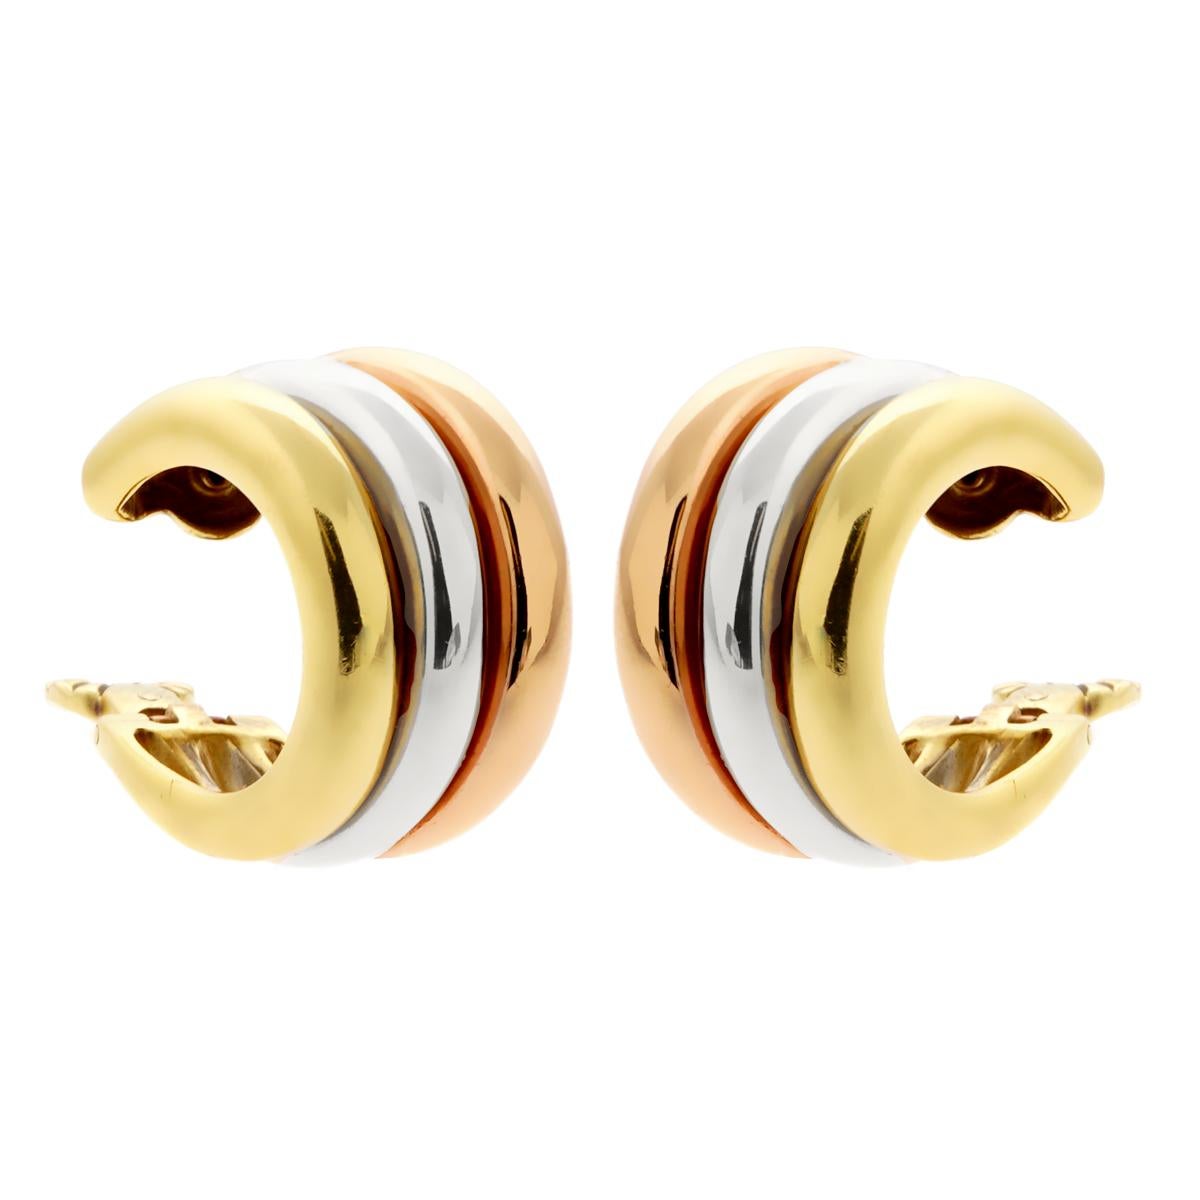 A fabulous and elegant pair of authentic Cartier hoop earrings featuring 18k white, yellow and rose Cartier gold in a timeless and modern design. They curve gently around the base of the ear and will beautifully complement any style.